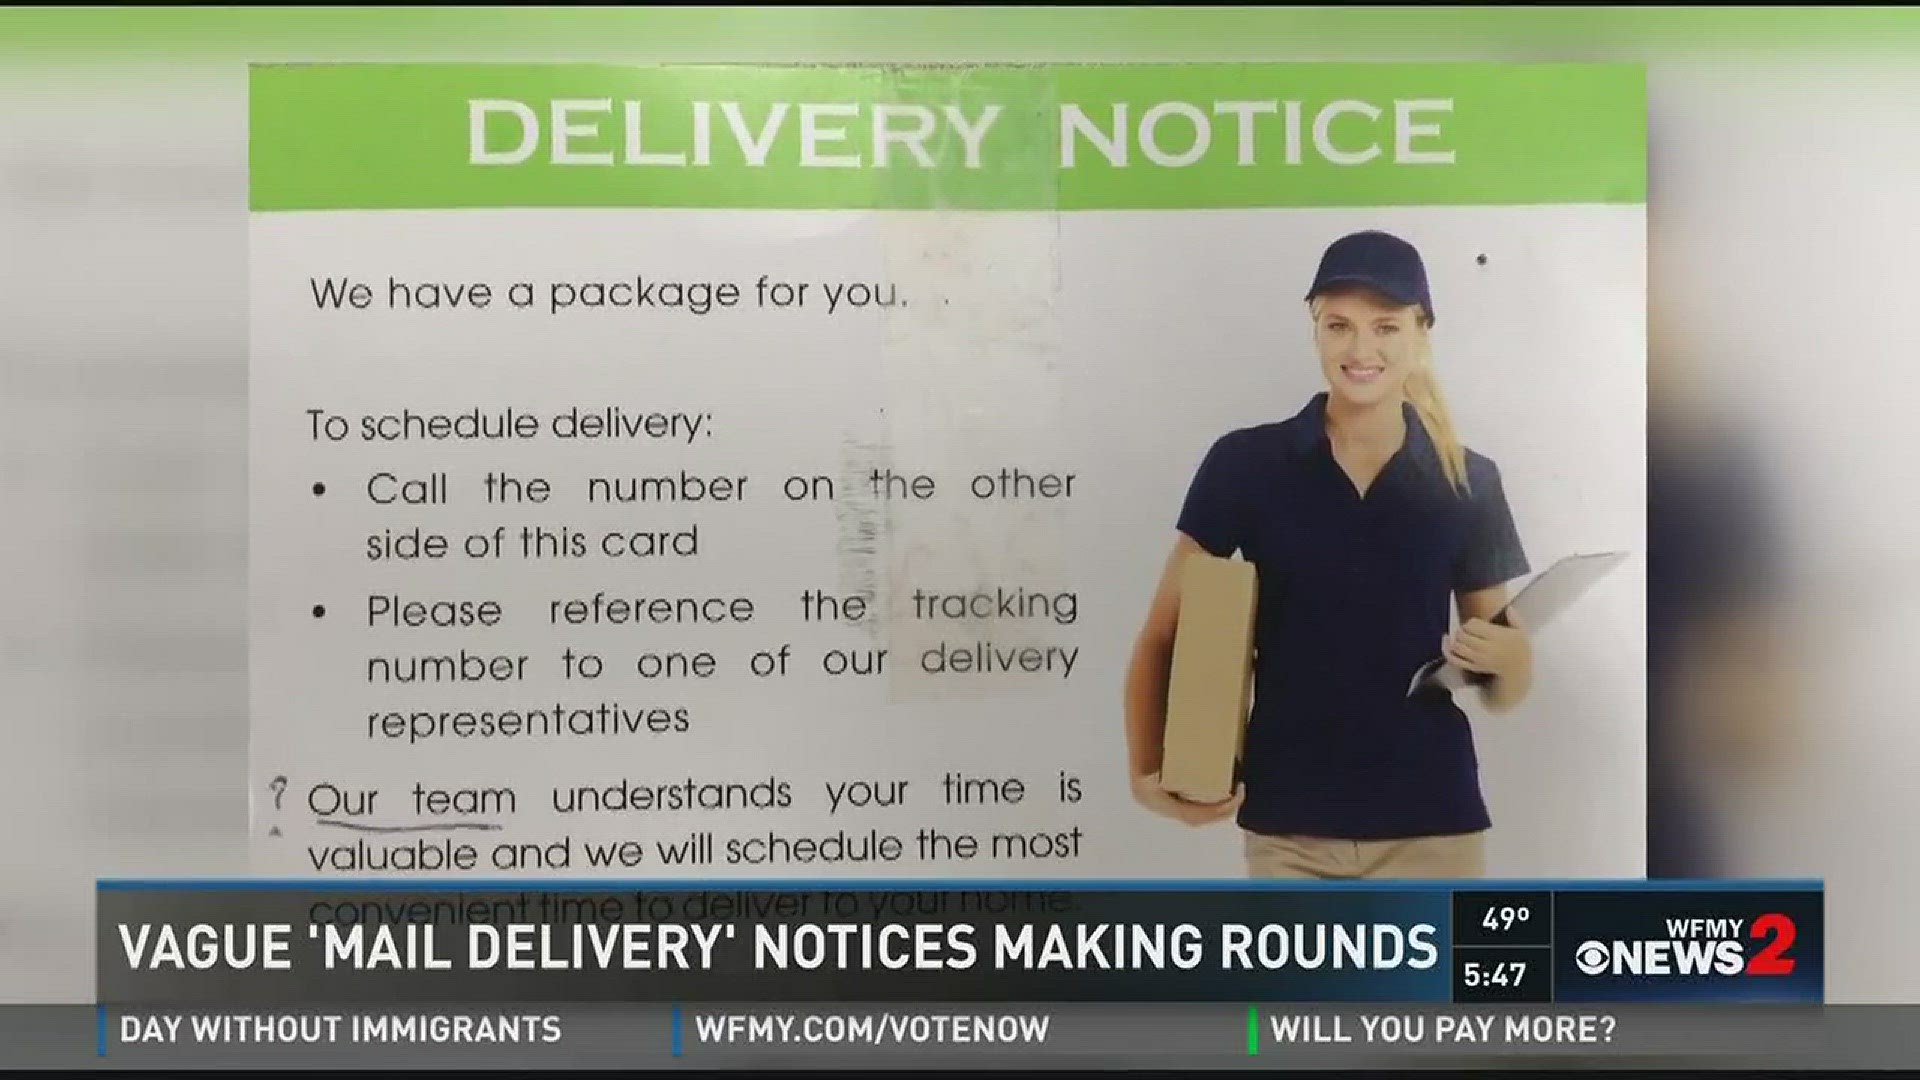 Vague 'Mail Delivery' Notices Making Rounds